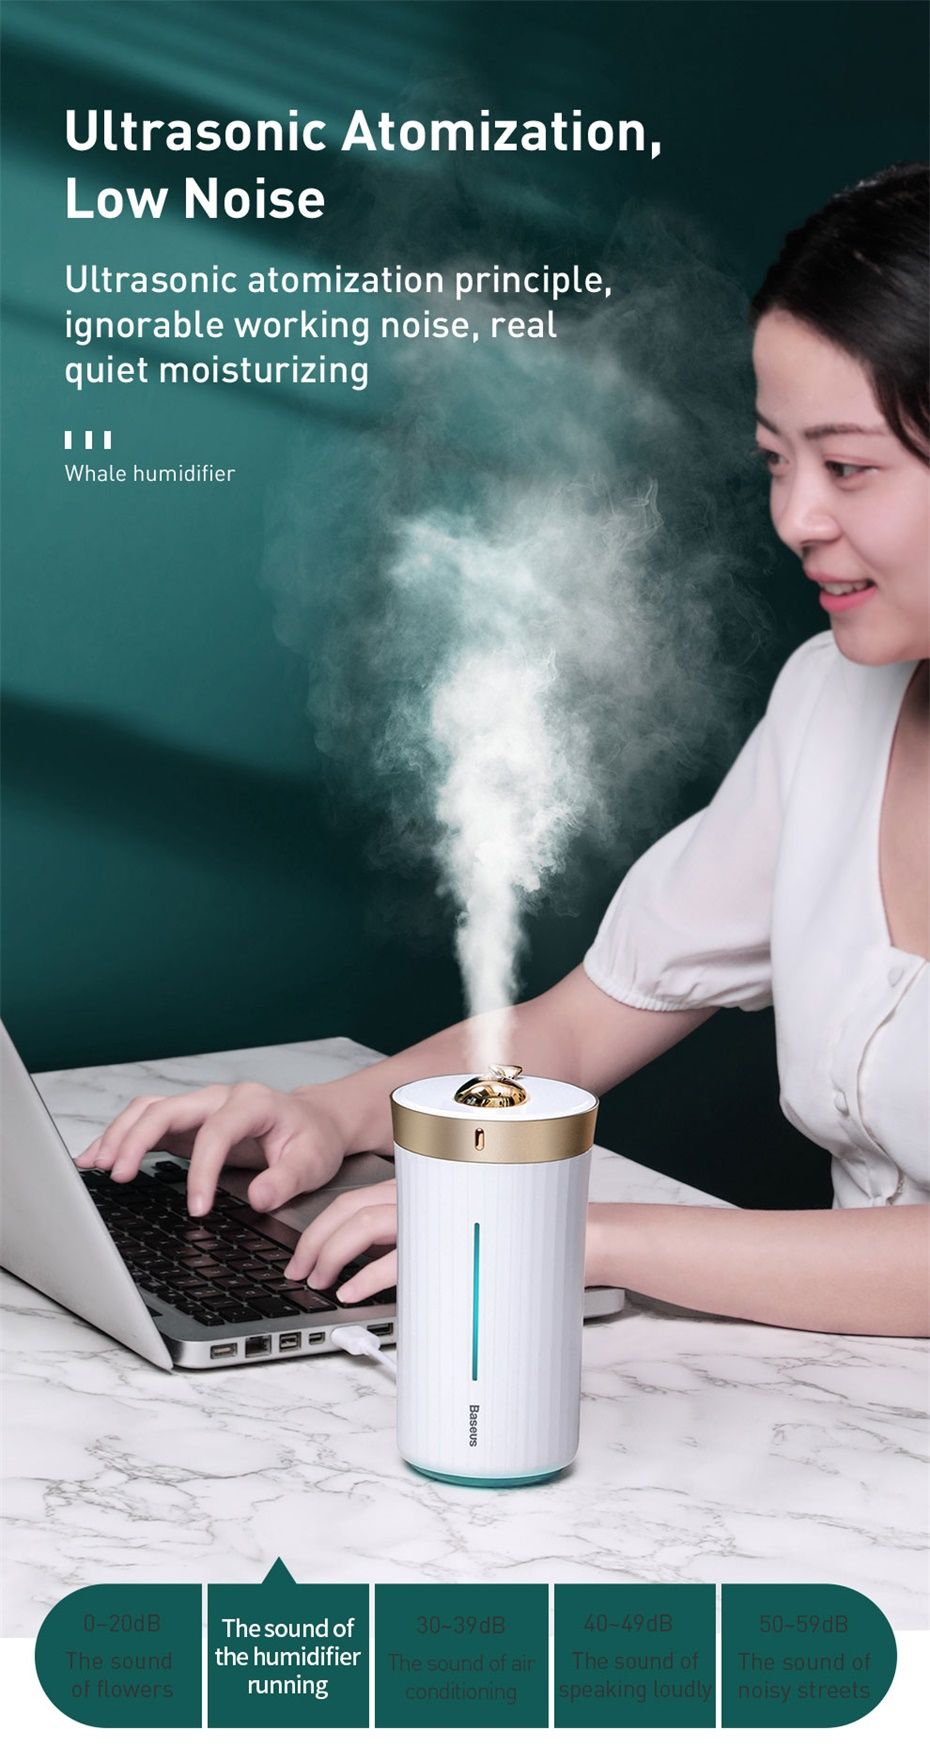 Baseus-Electric-420mL-Press-button-Control-Ultrasonic-Humidifier-With-LED-Light-Home-Desktop-USB-Air-1577313